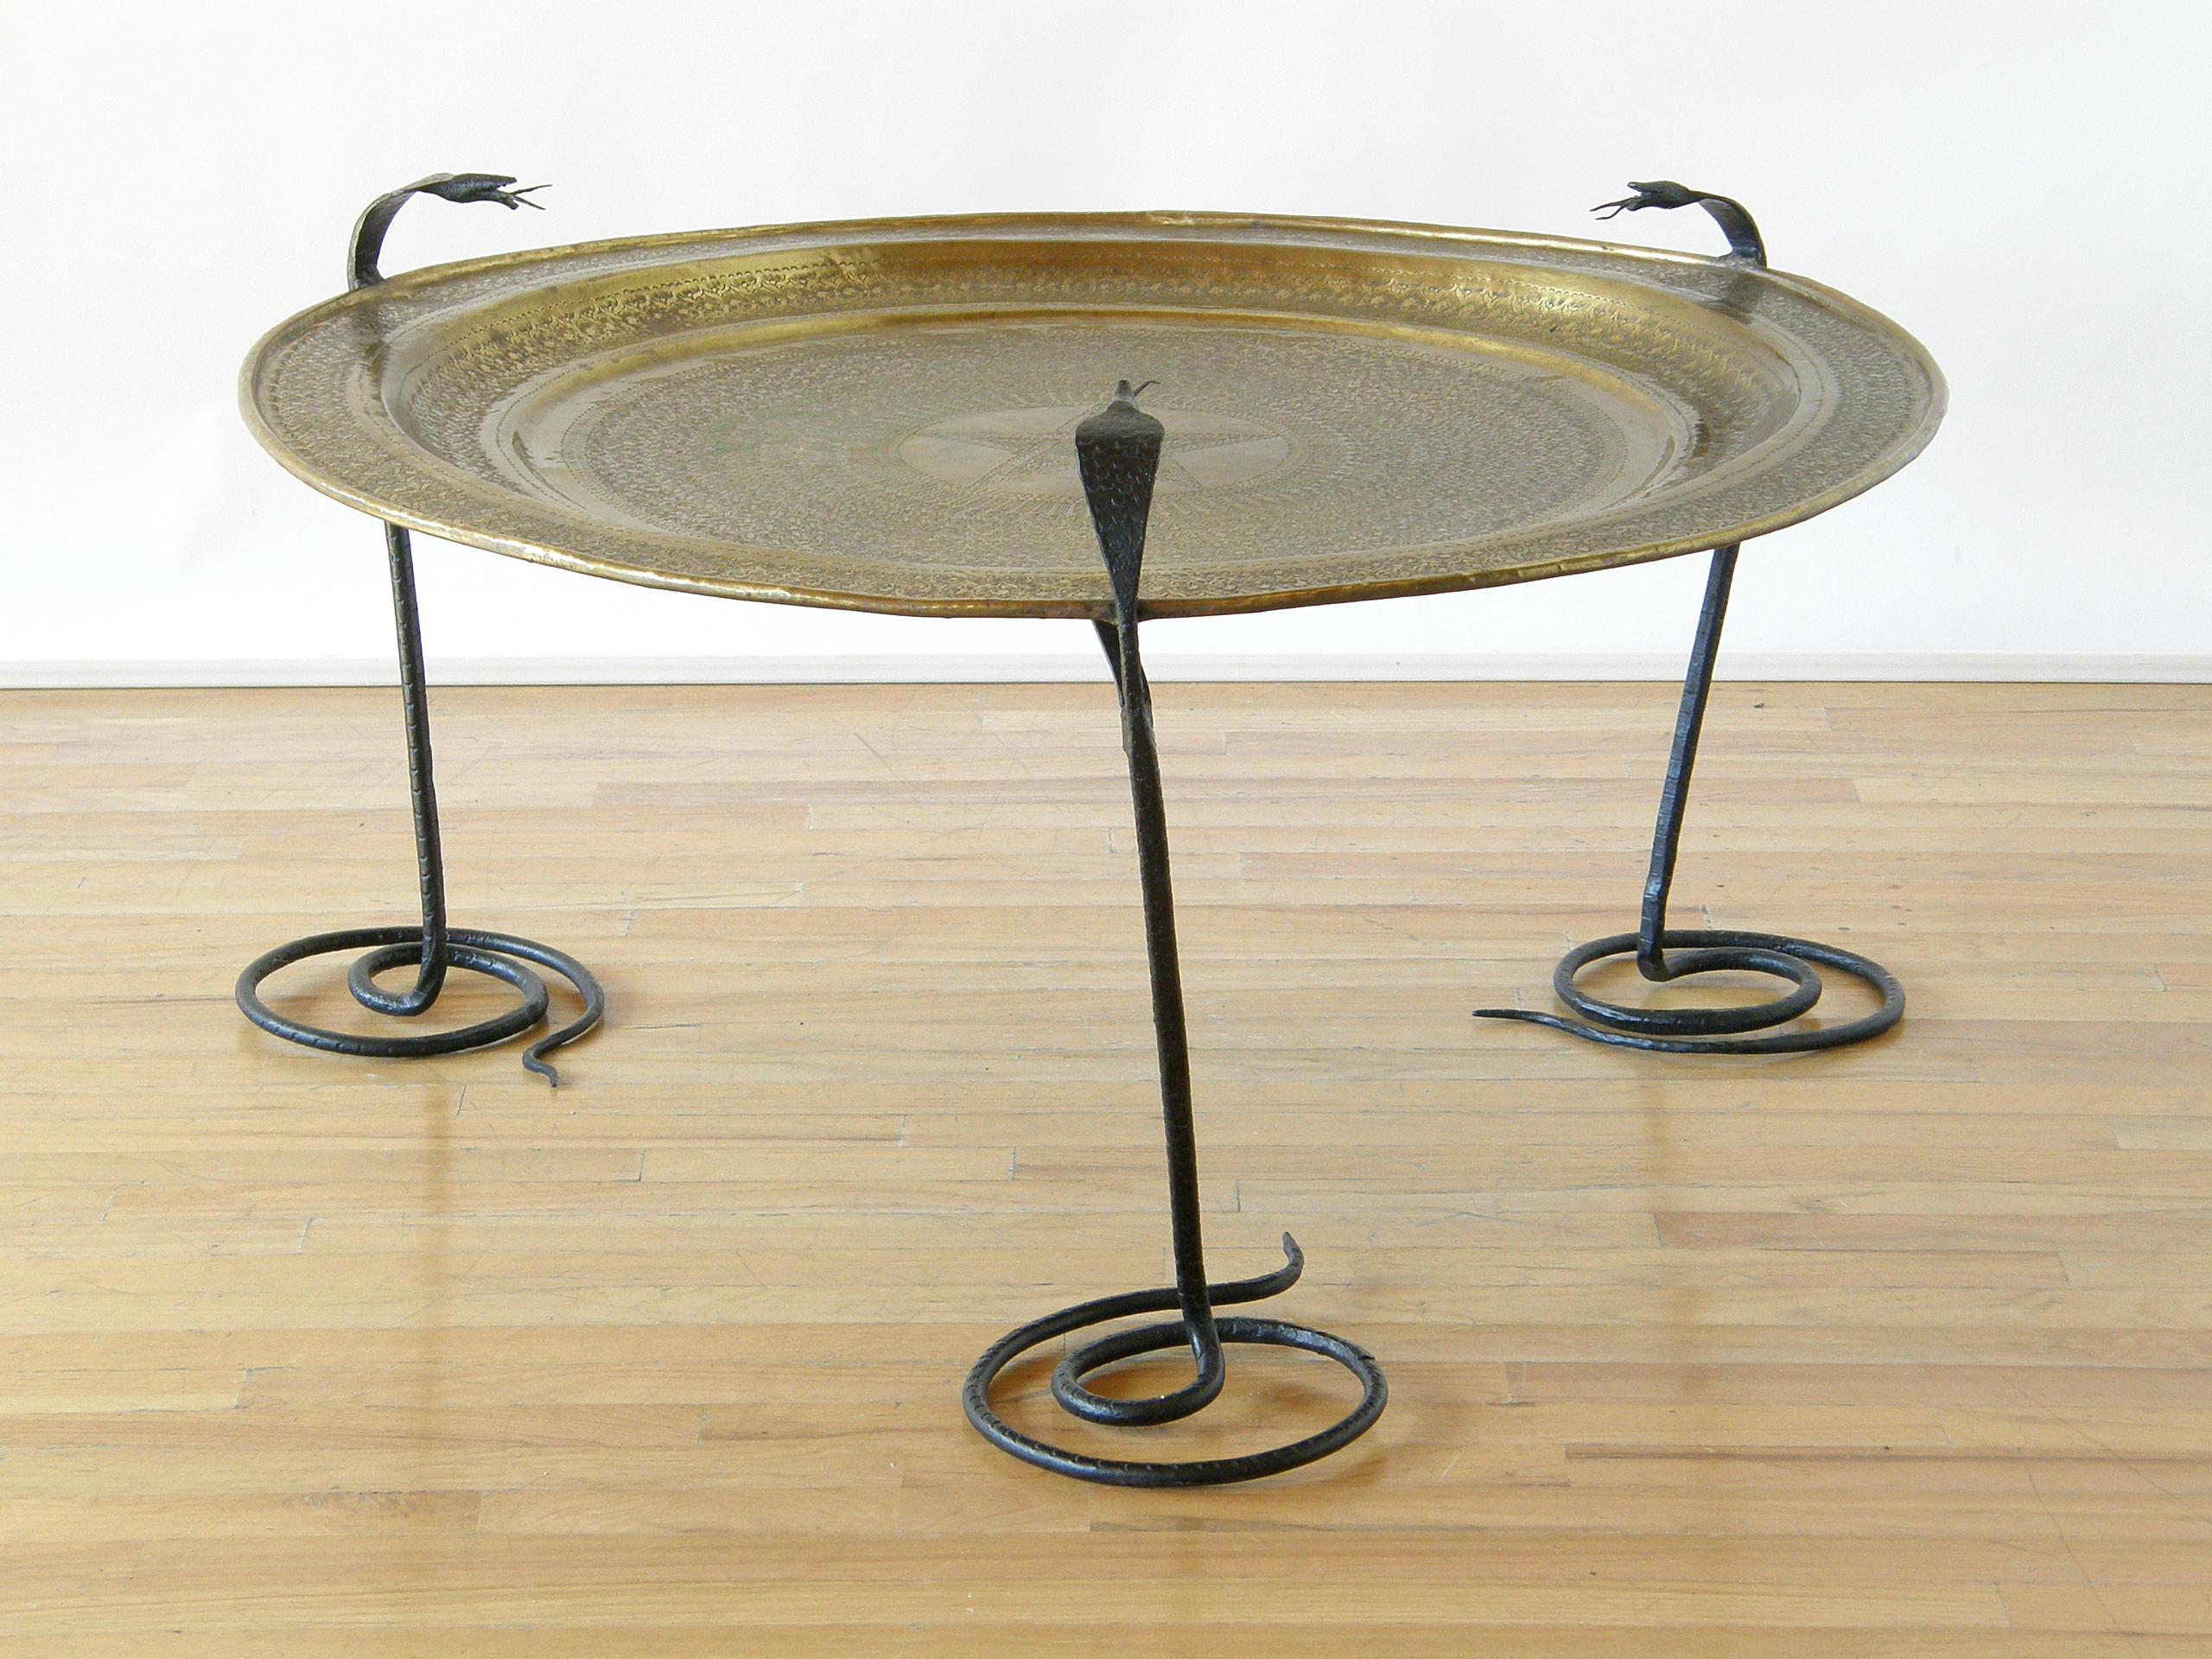 Moorish Wrought Iron Serpents Table with Hand Tooled Star Pattern on Brass Top For Sale